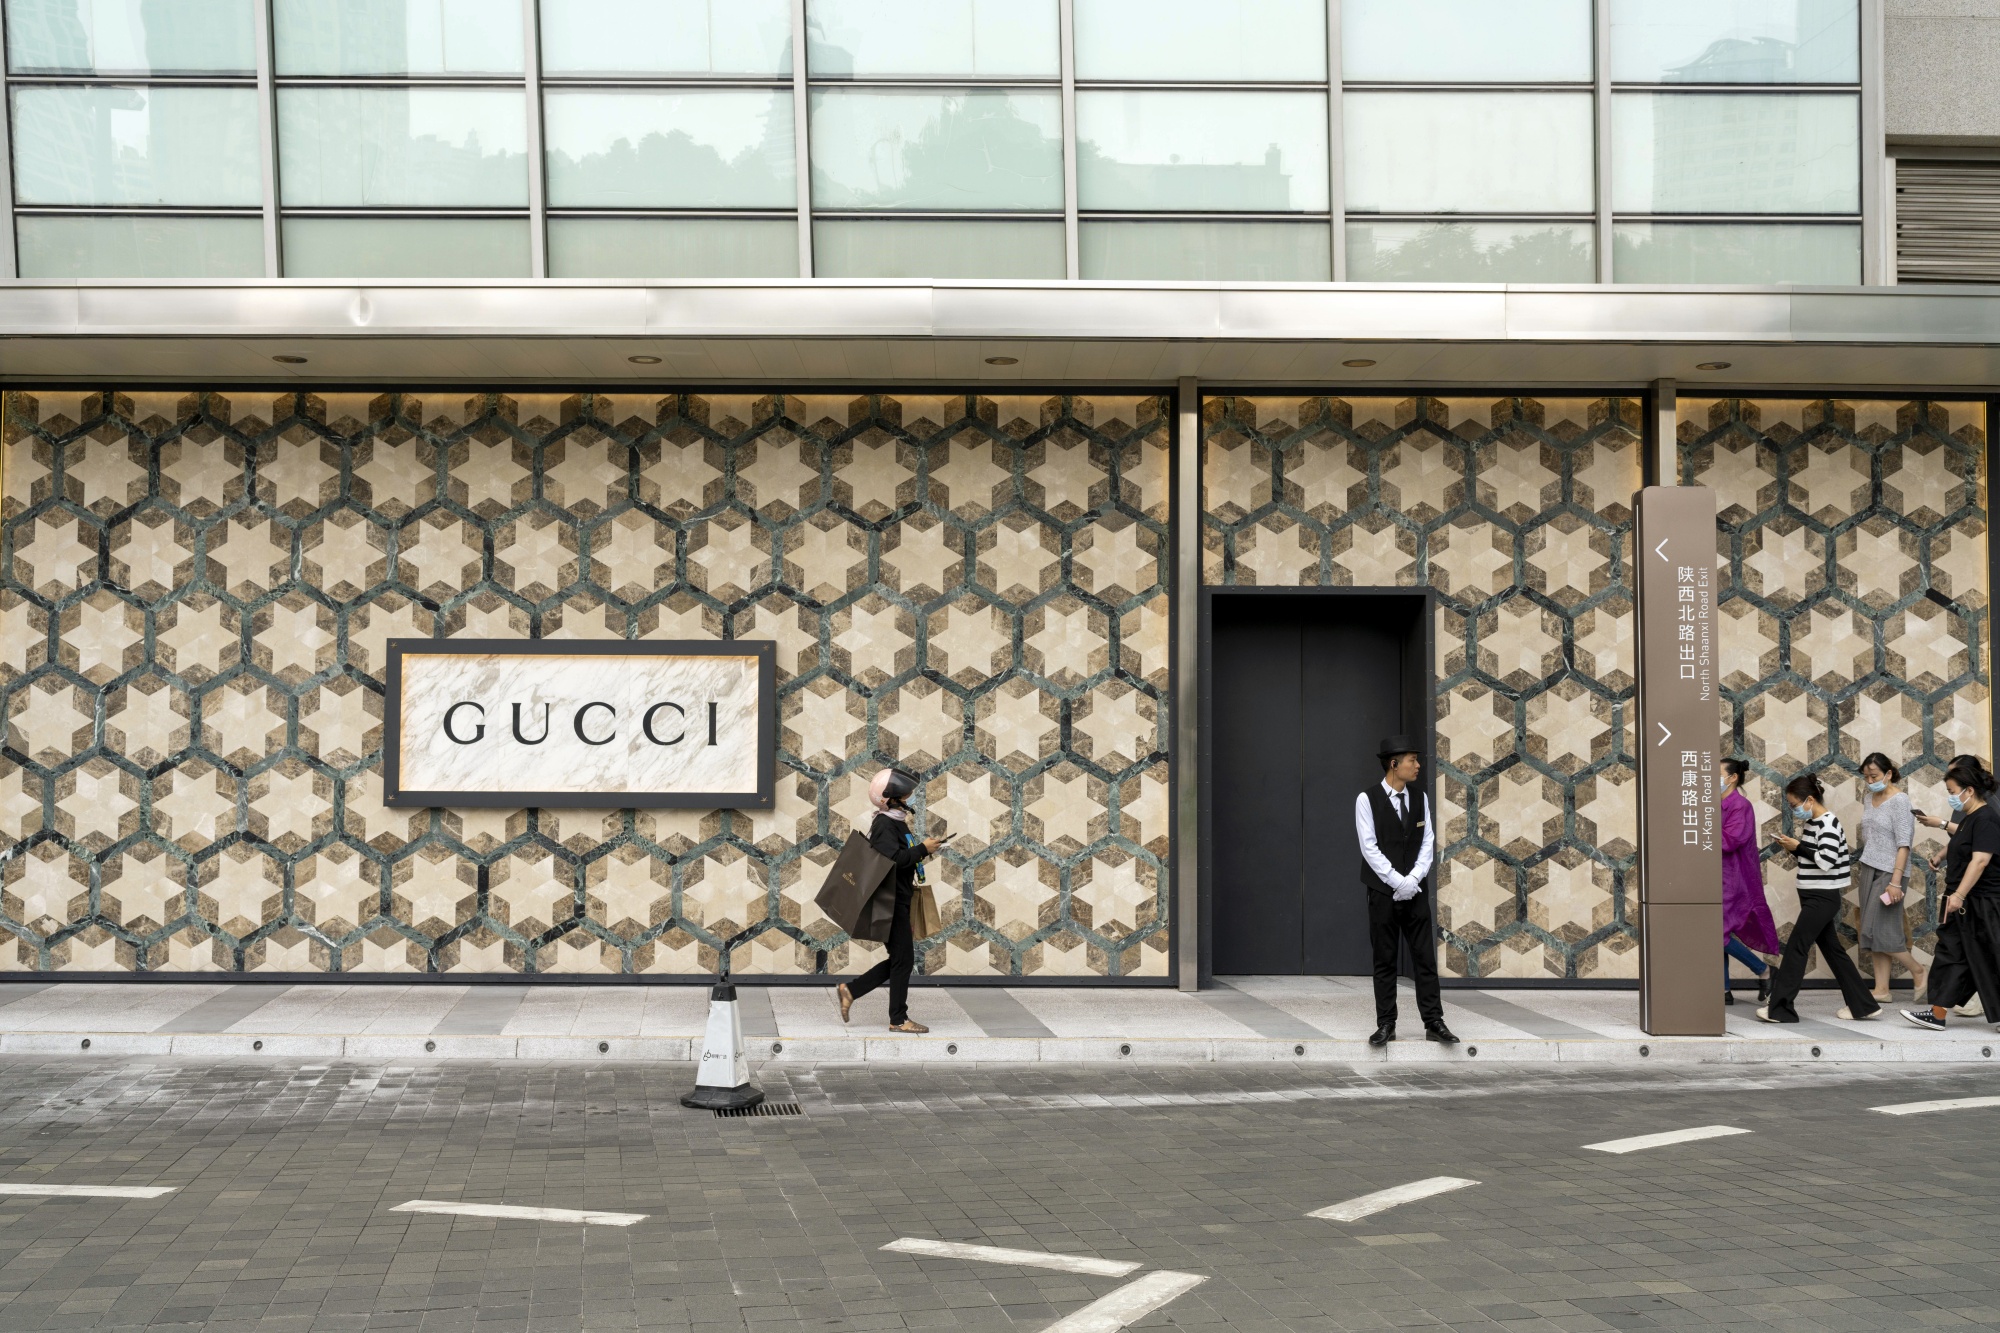 A Gucci store in Shanghai.